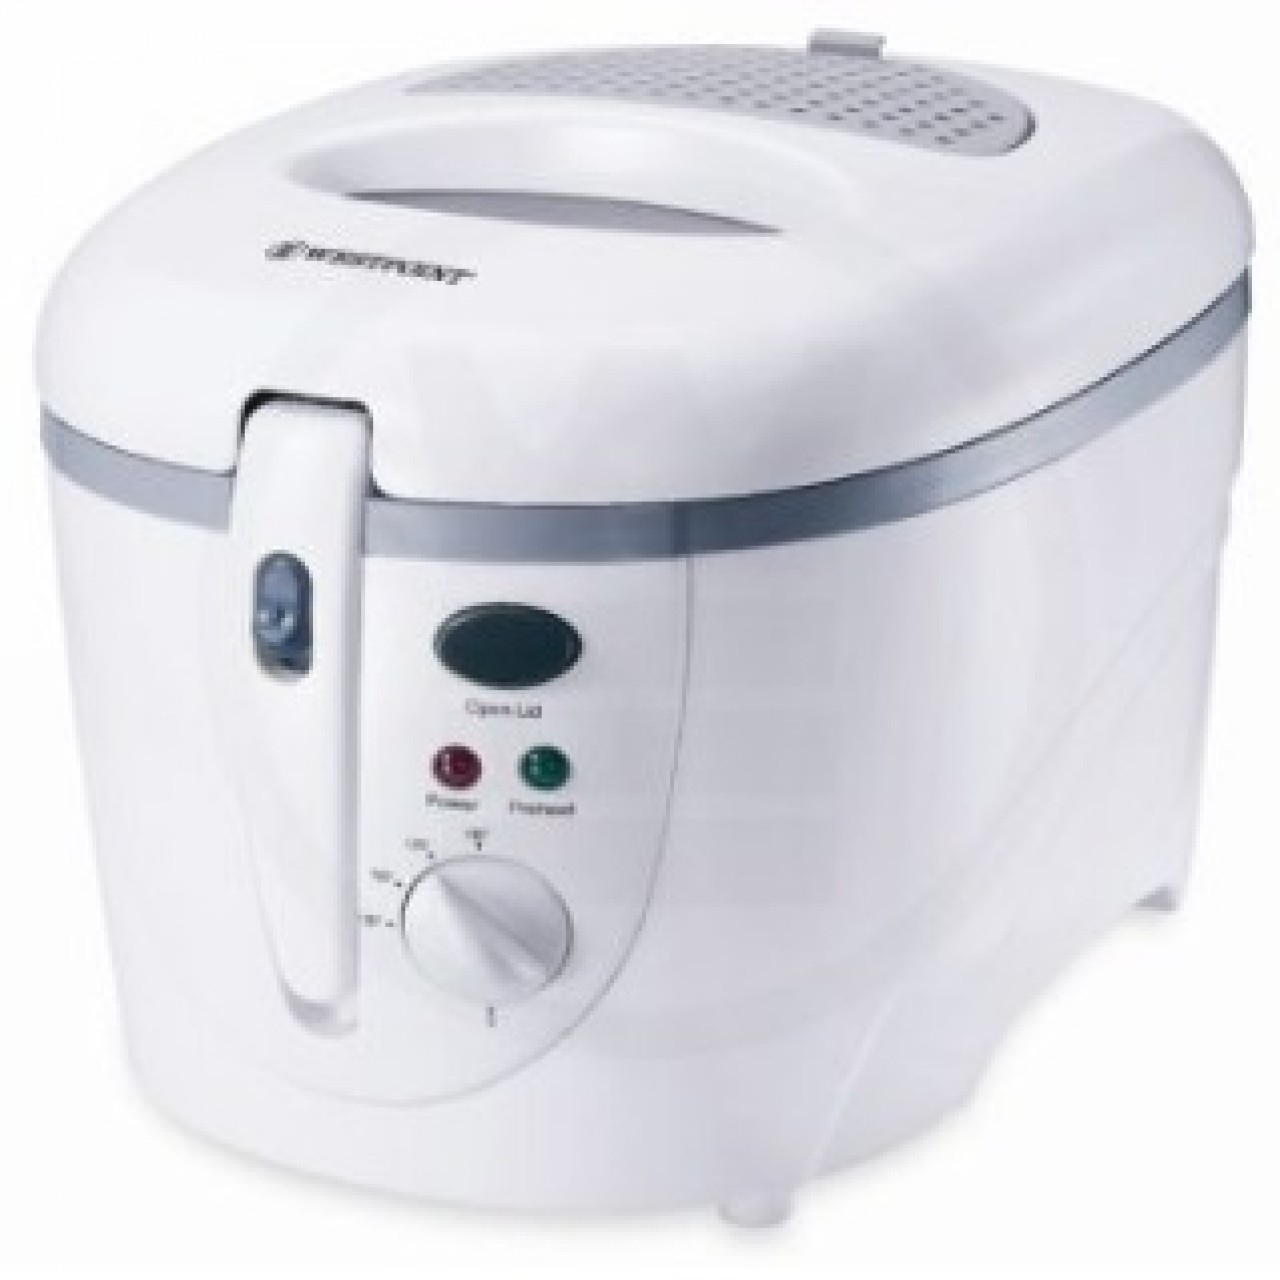 Westpoint WF-5236 Cool Touch Electric Deep Fryer